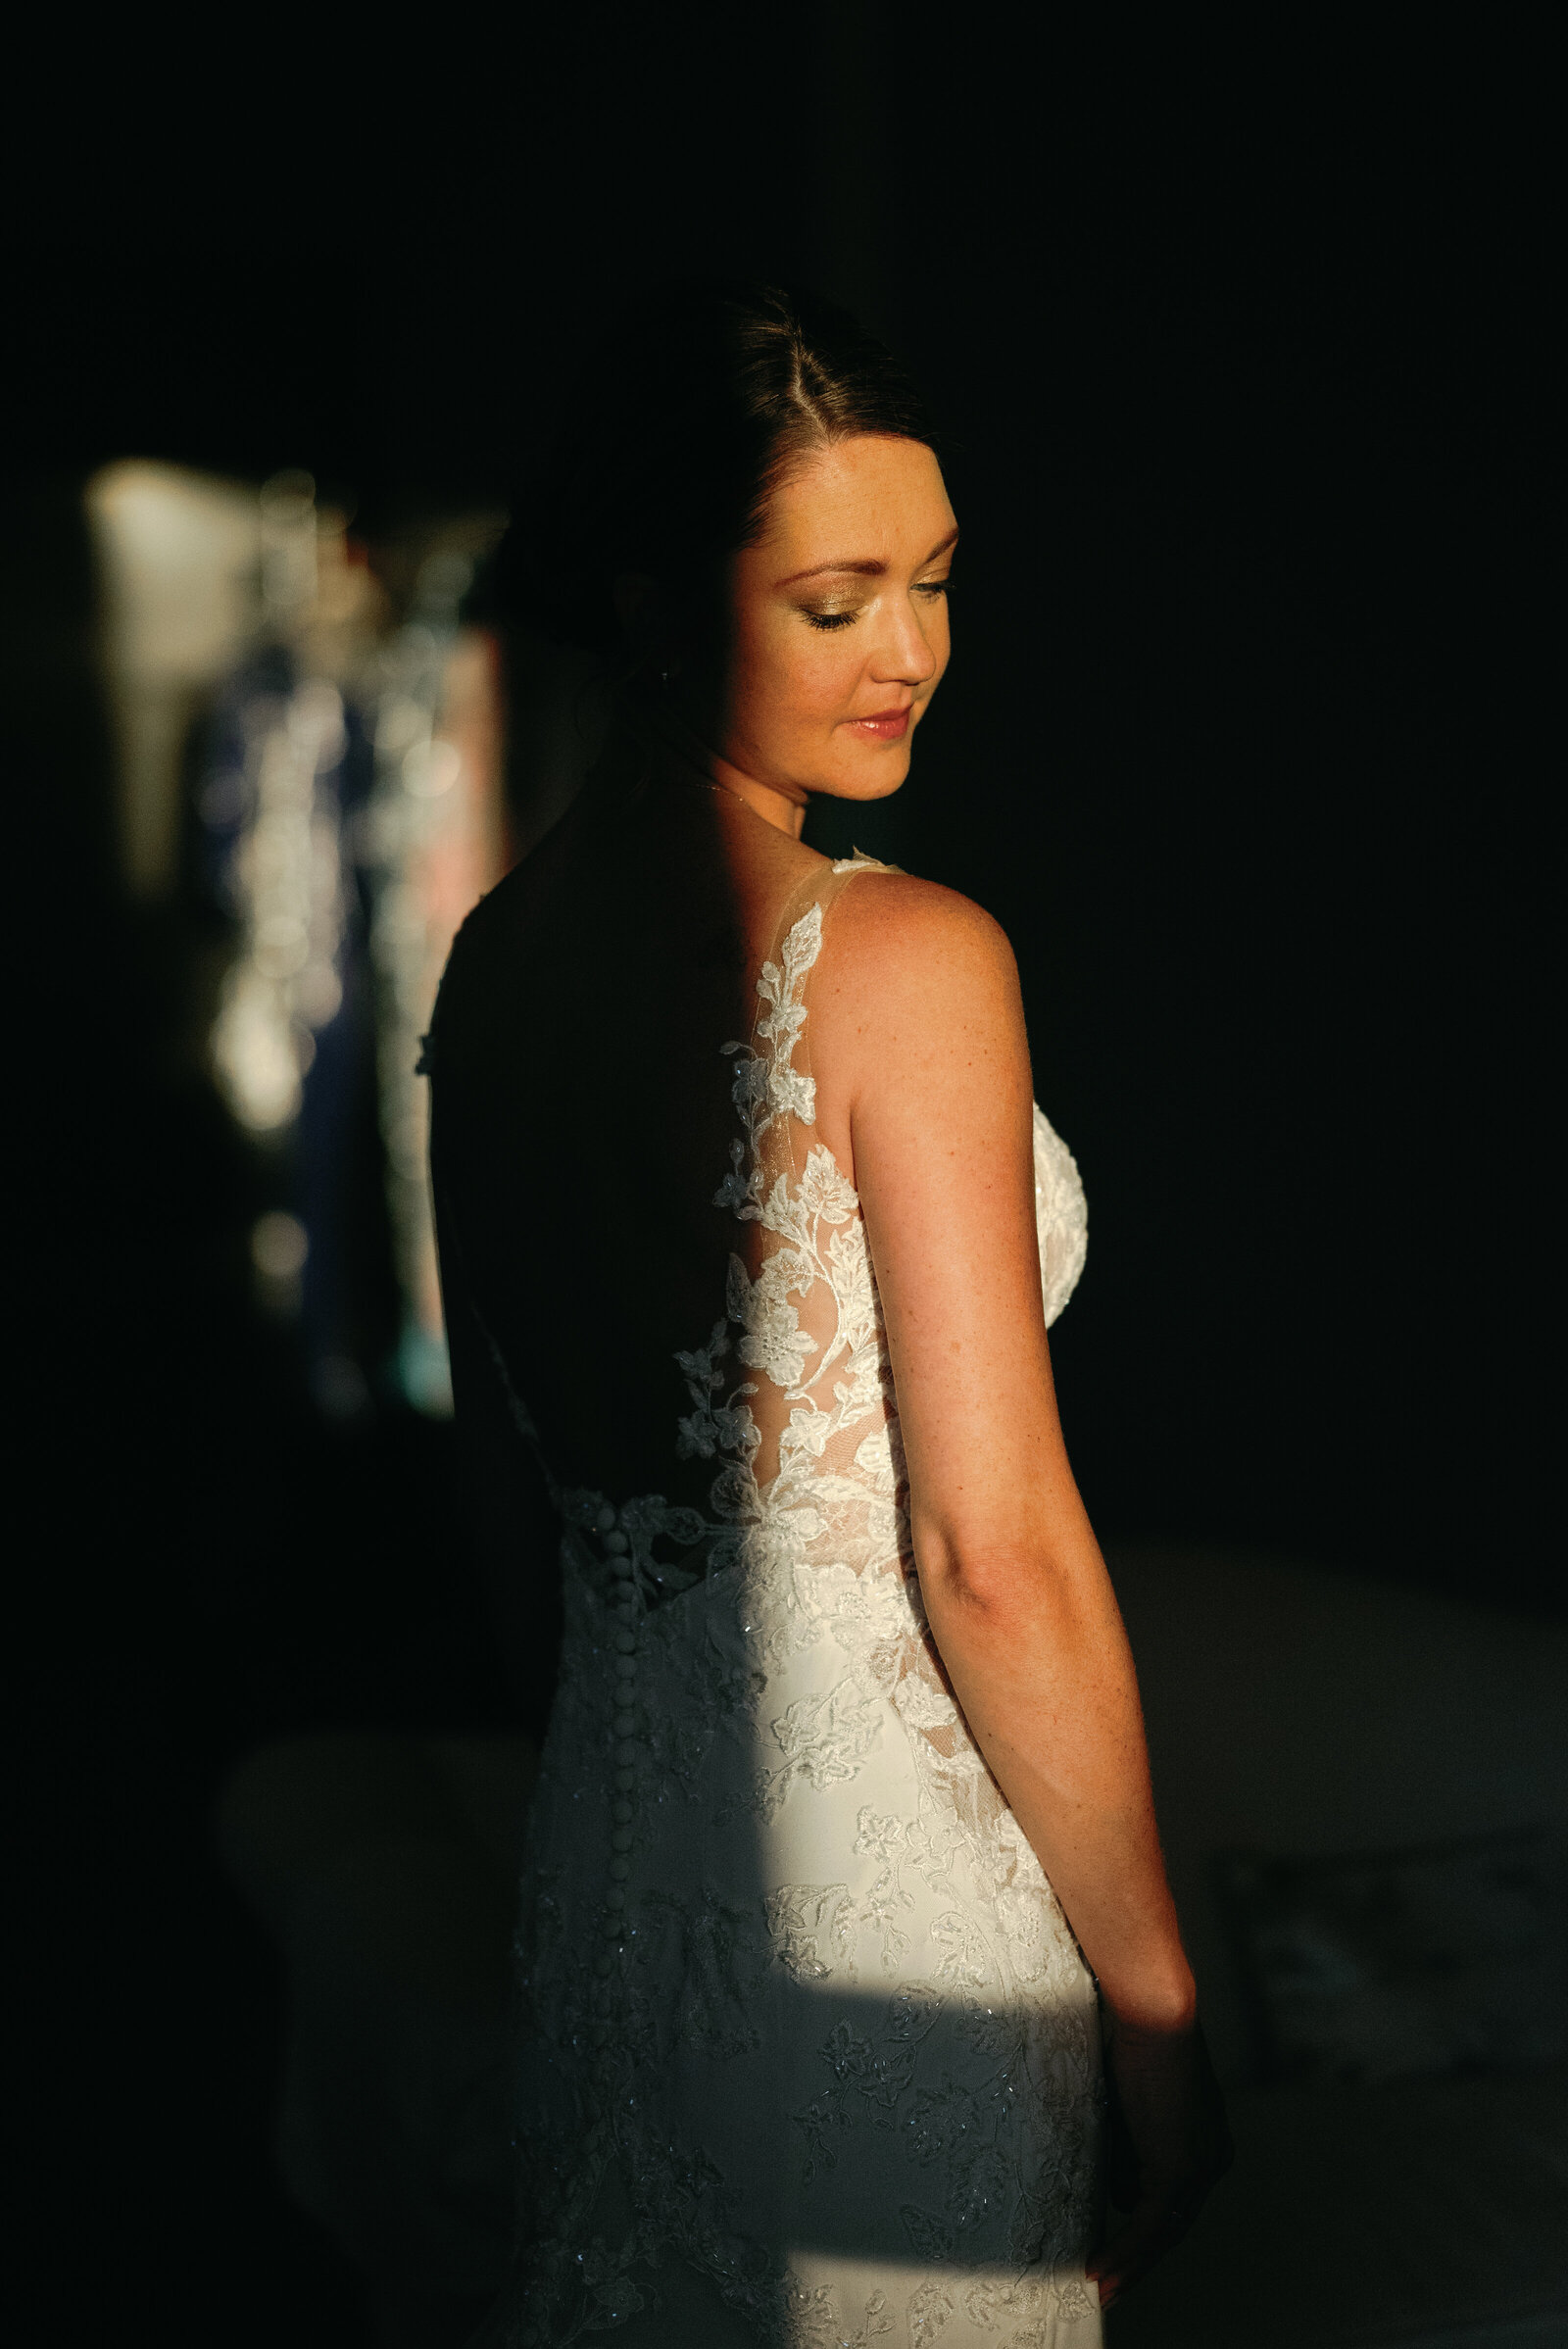 dramatic lighting showing only half of the bride as she waits for the ceremony to begin